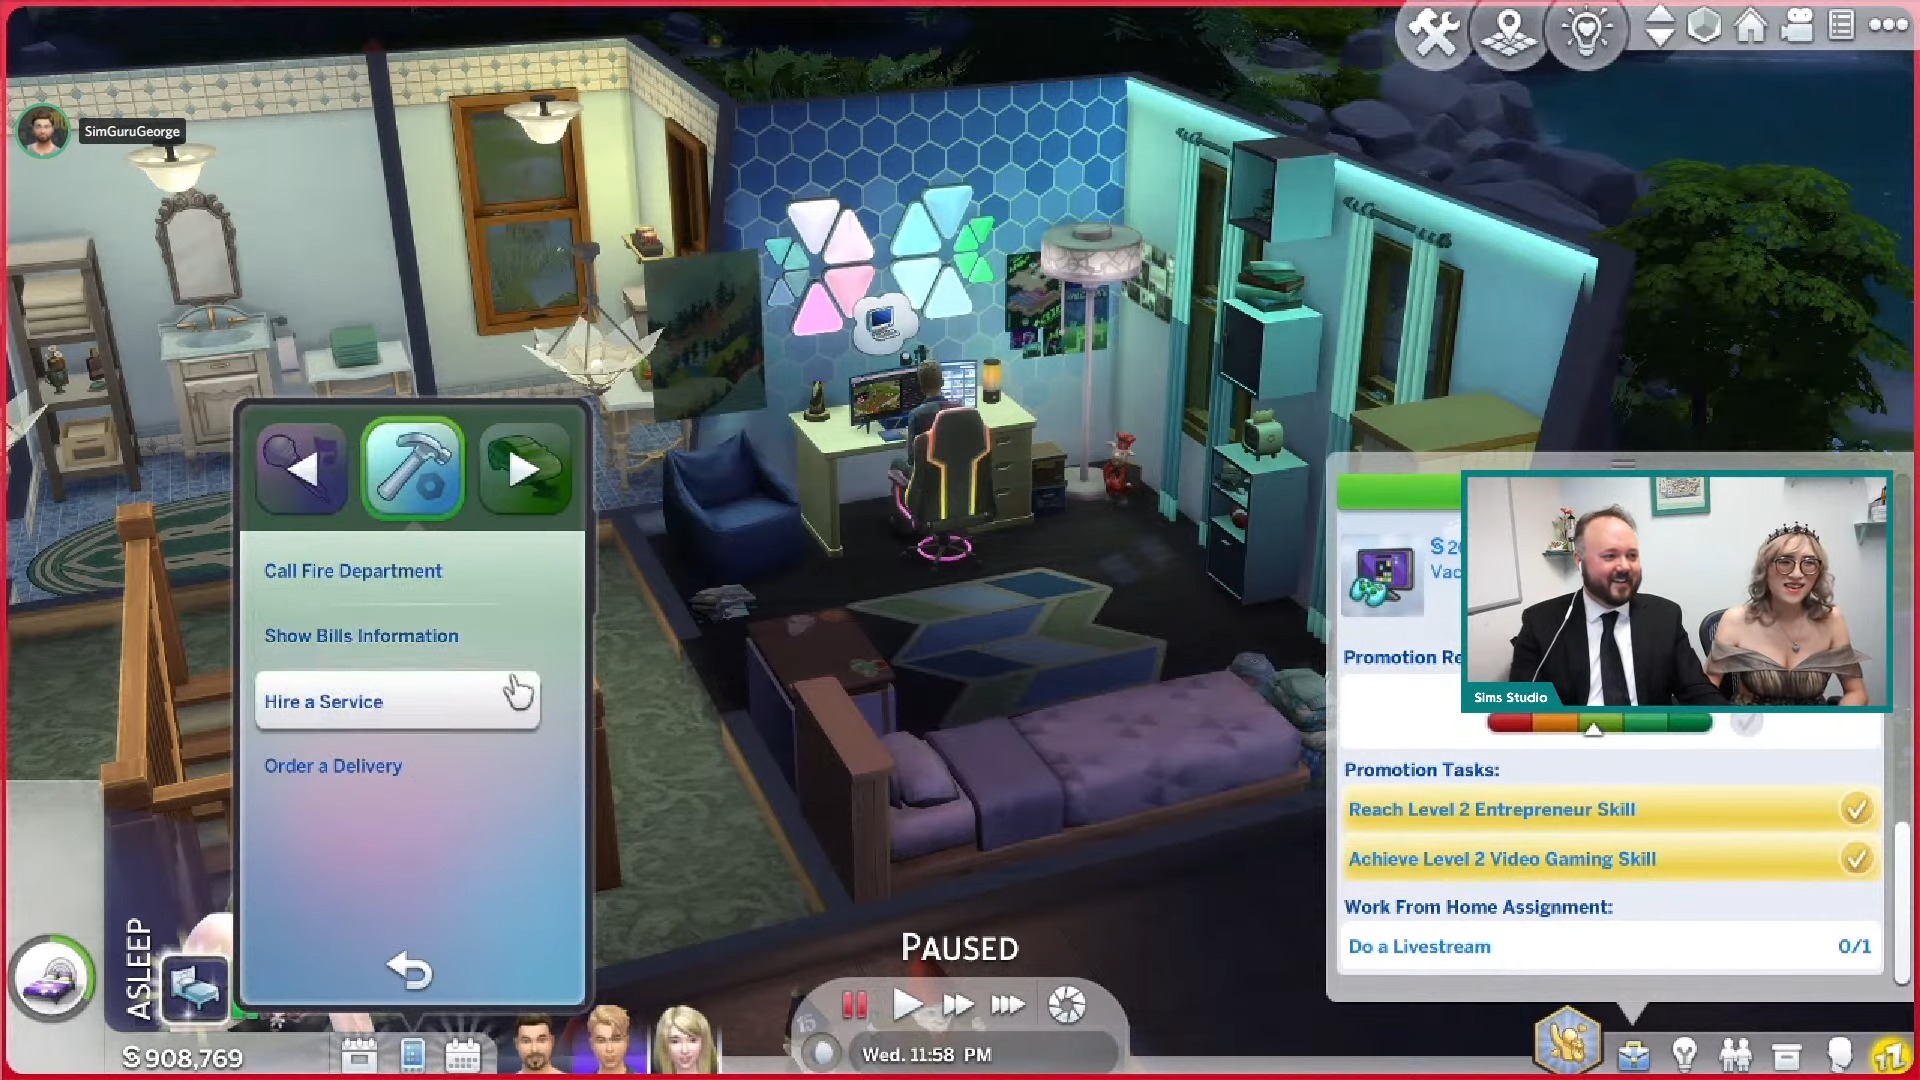 The Sims 4 High School Years Livestream - New Mobile Phone Interface - Services Menu (Call Fire Department, Show Bills Information, Hire a Service or Order a Delivery)